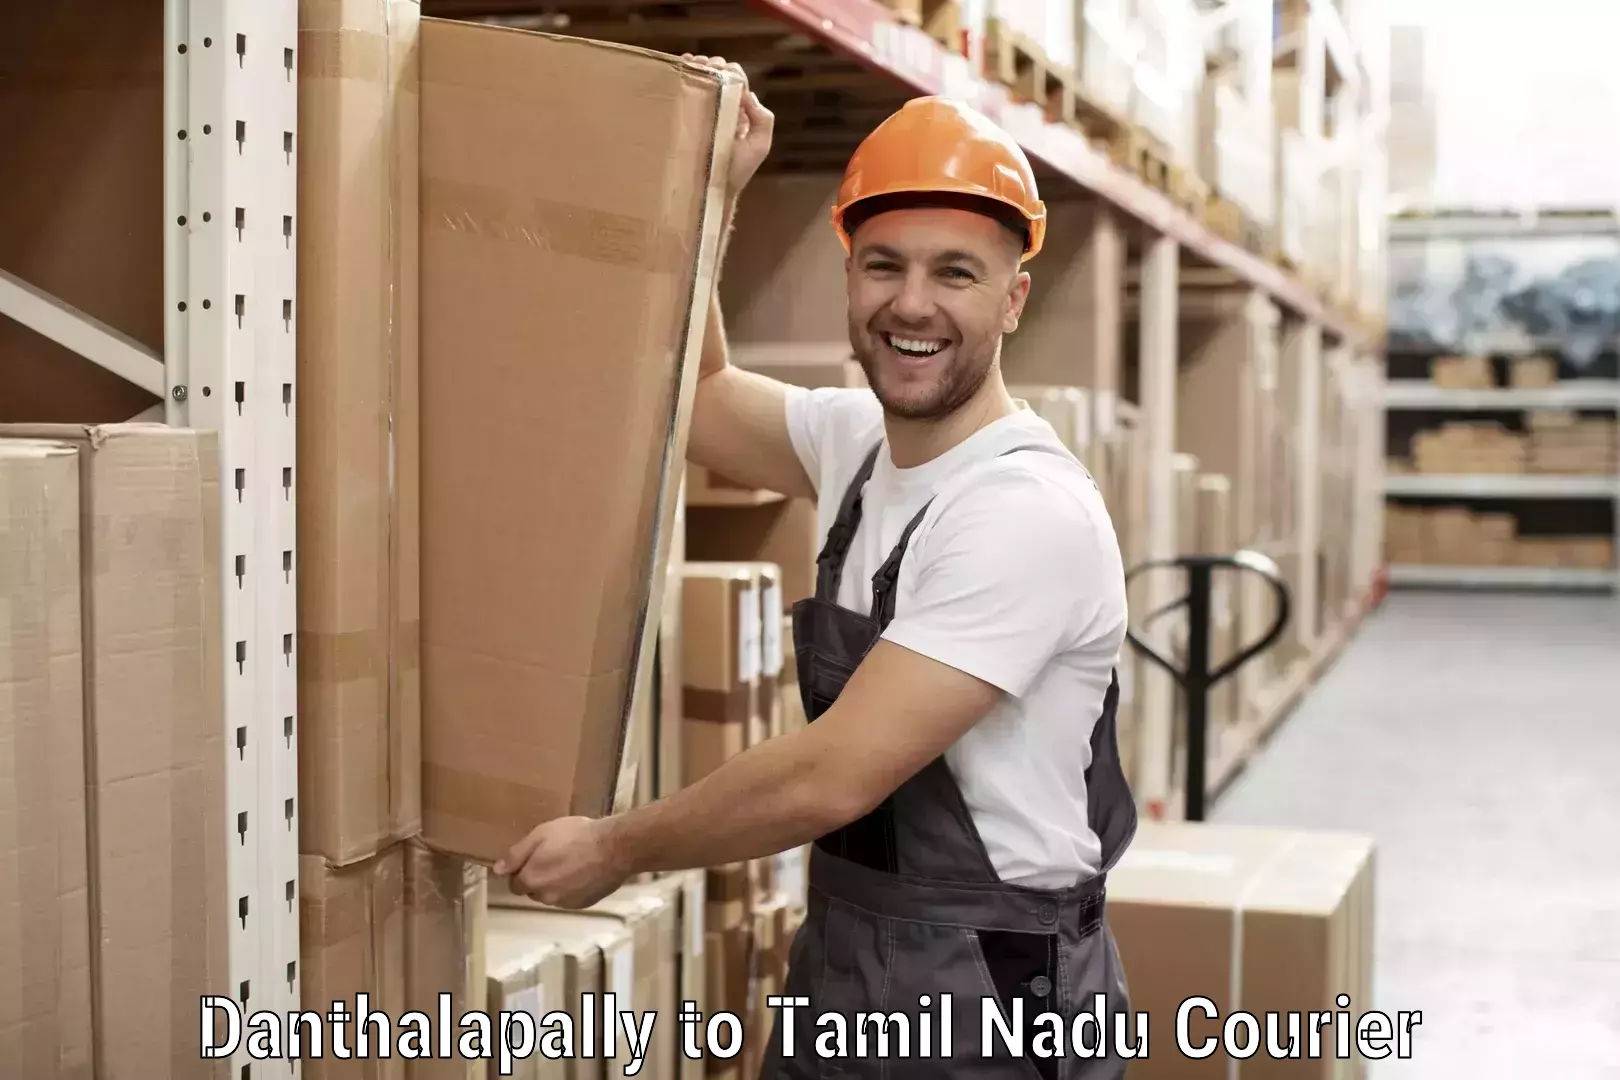 Courier service innovation Danthalapally to Turaiyur